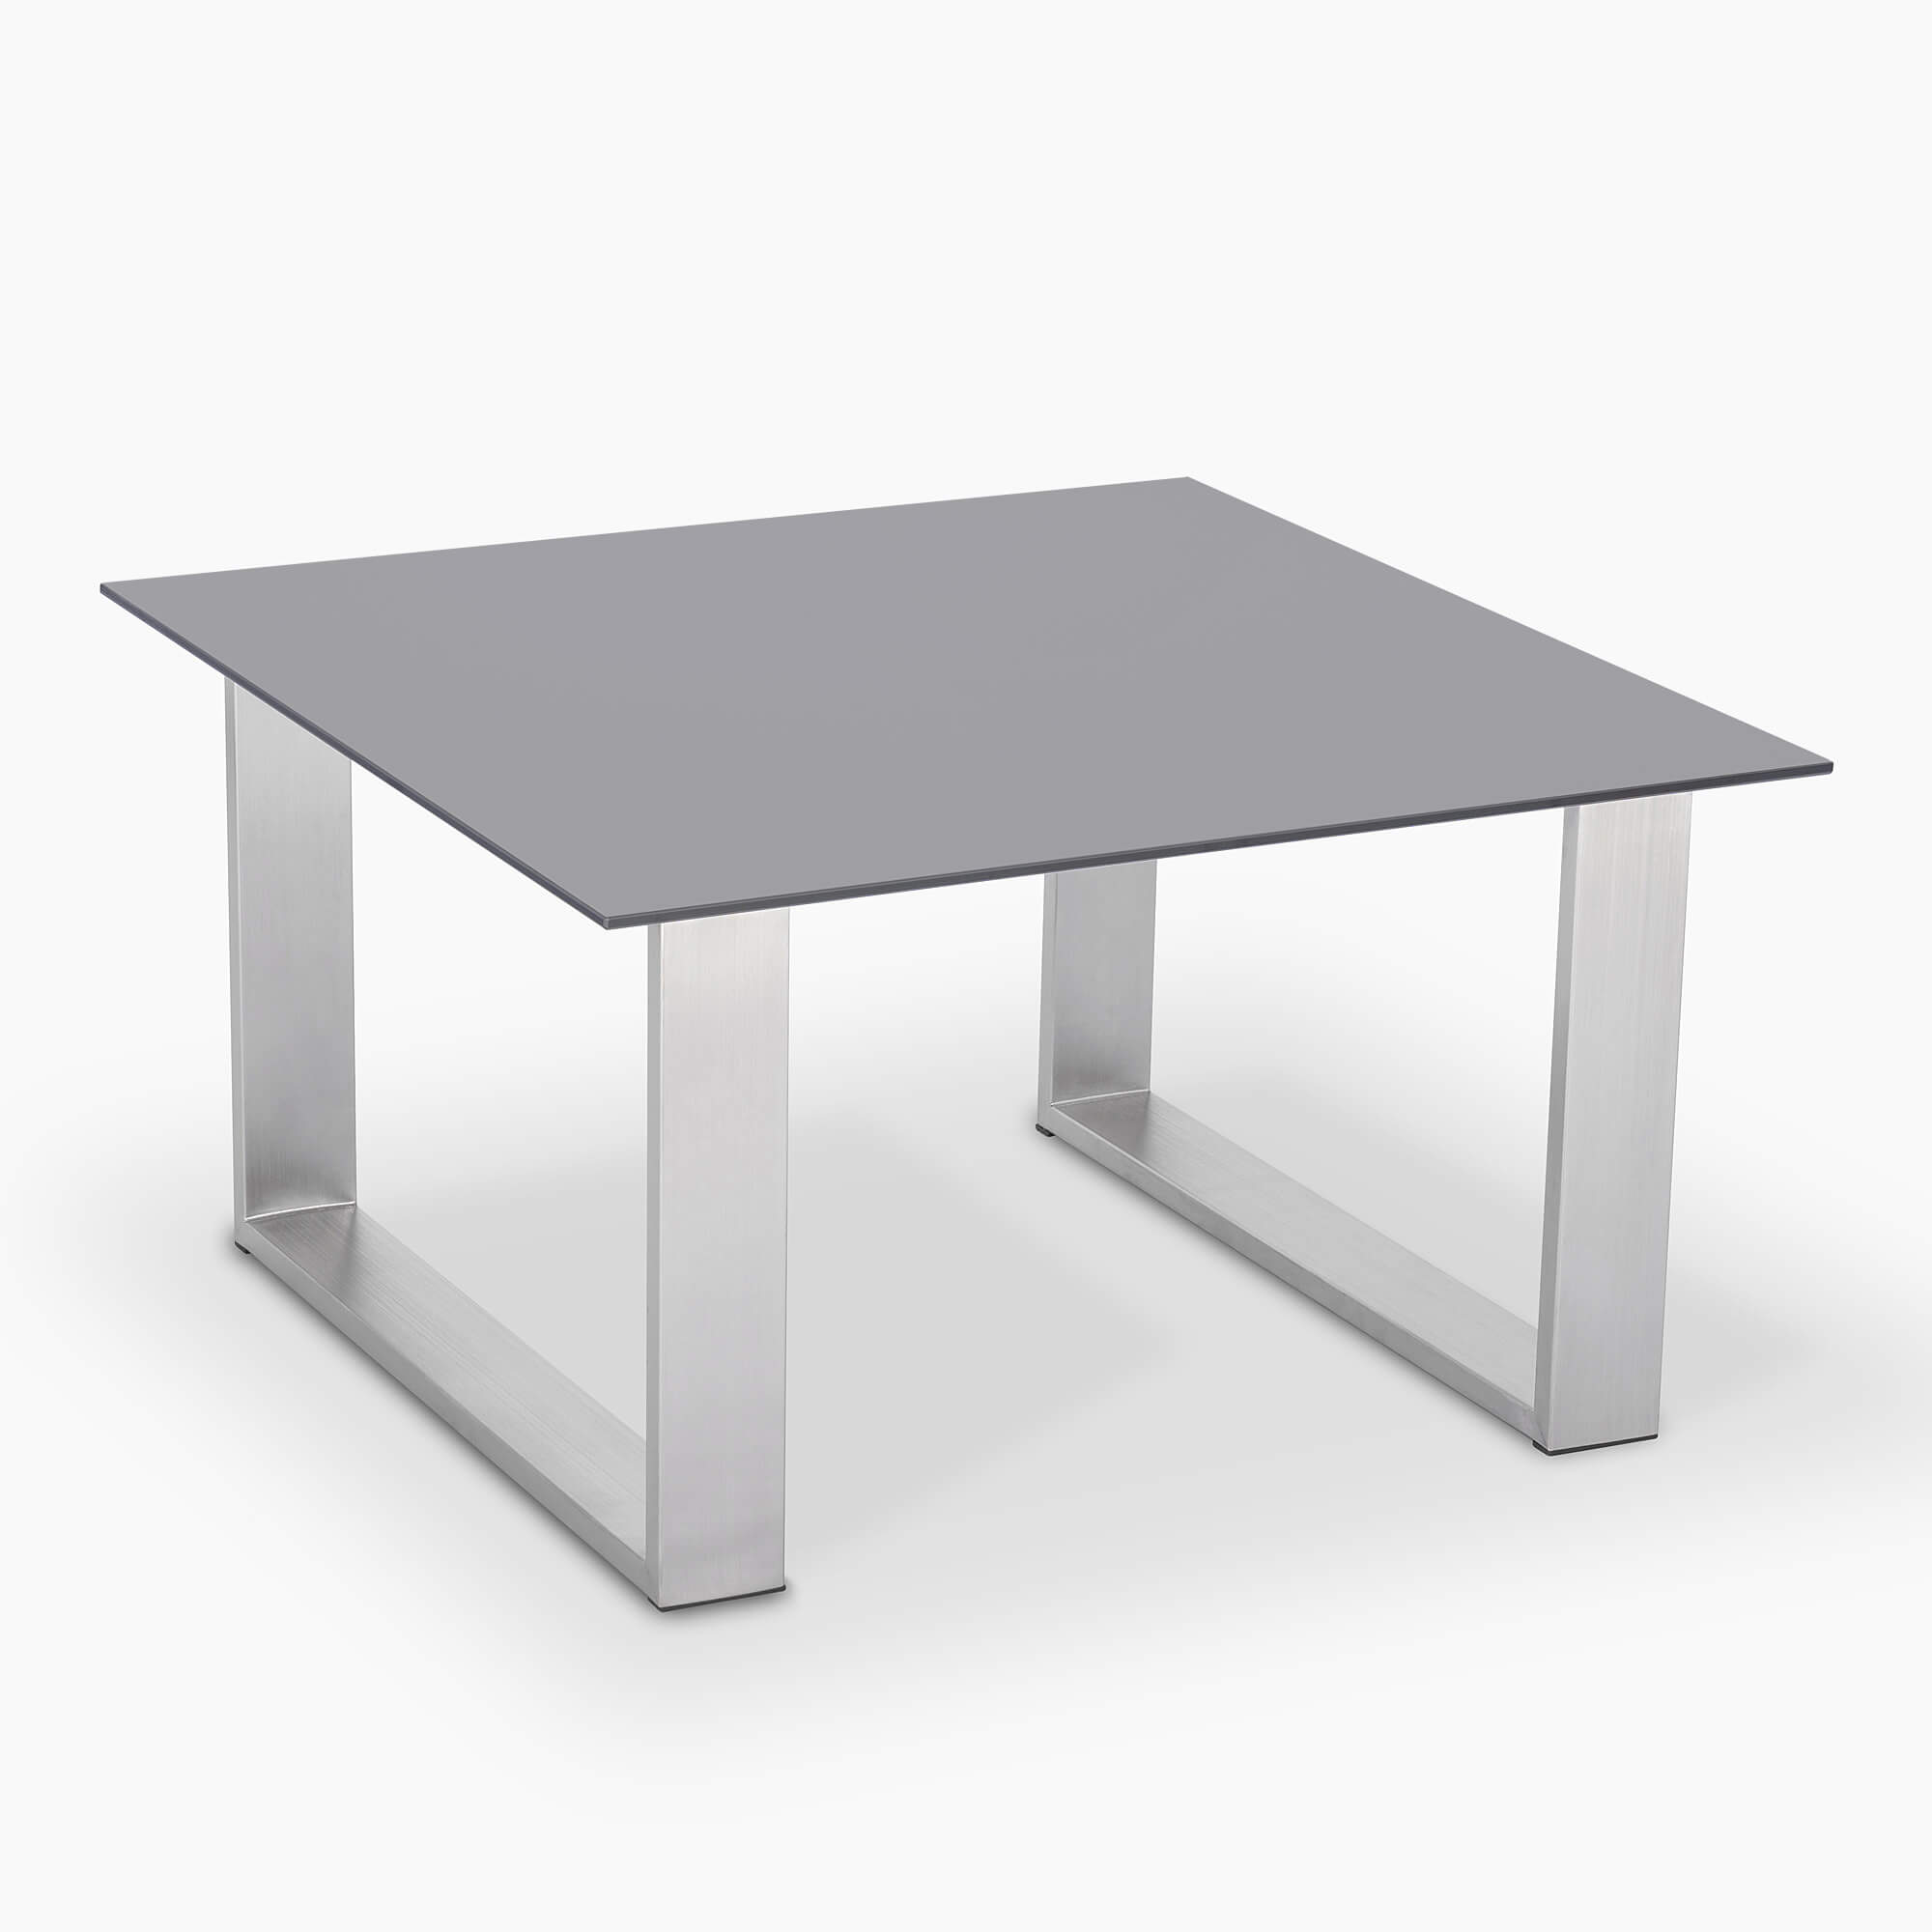 Square-coffee-table-80x80-cm-stainless-steel-skids-silver